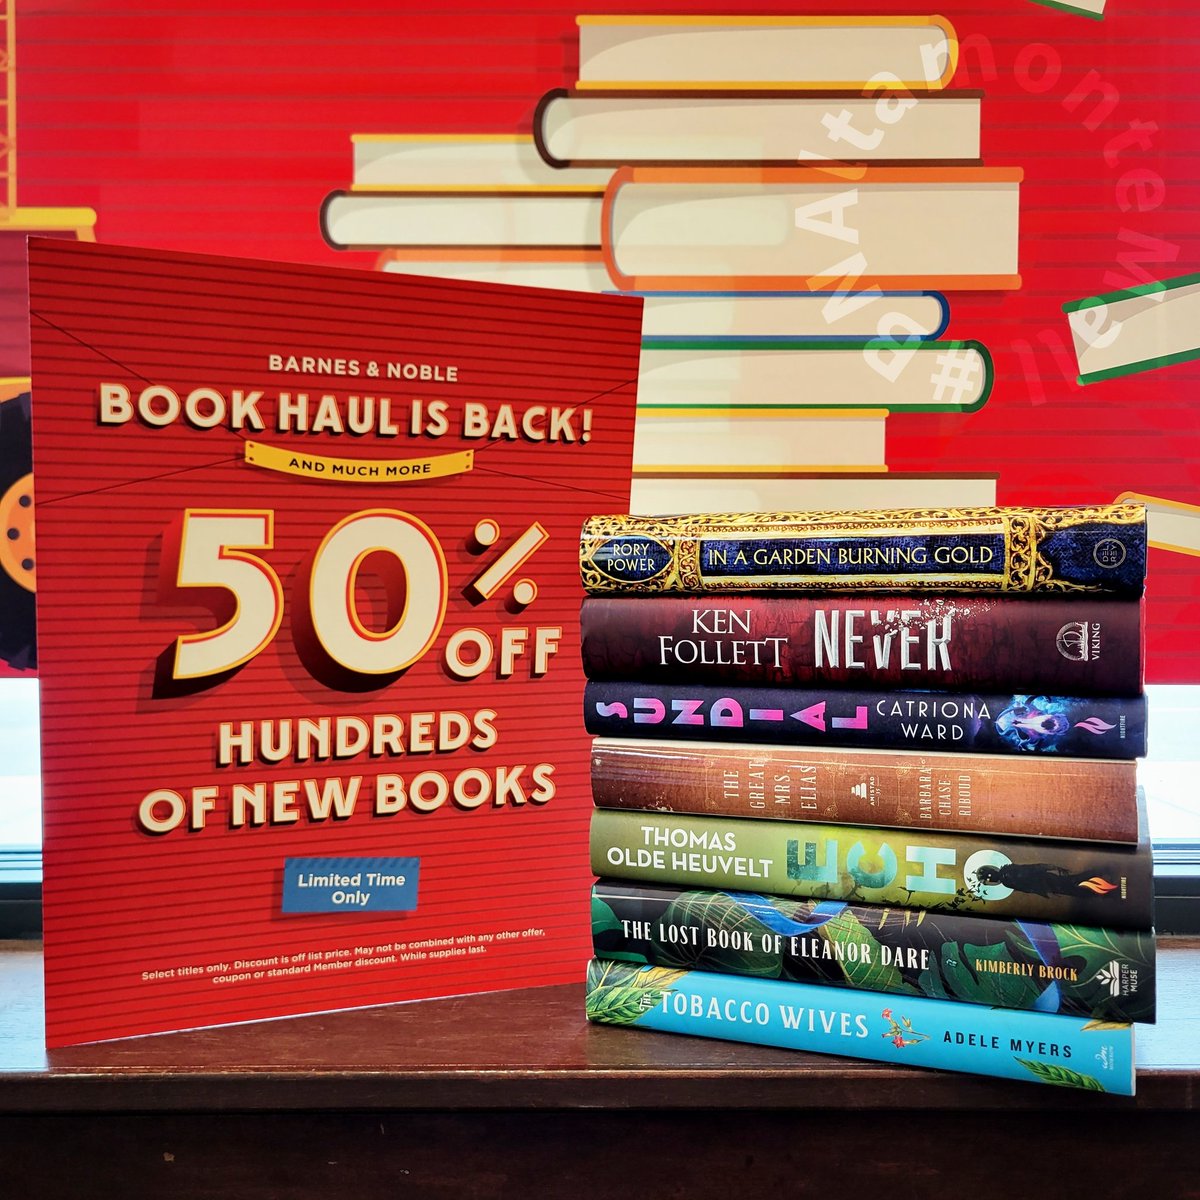 Book Haul is back!!! Hundreds of new and recent releases are on sale for 50% off starting today!! Don't miss out on these awesome reads at amazing prices. Quantities are limited, so stop by and load up your #tbrpile !!